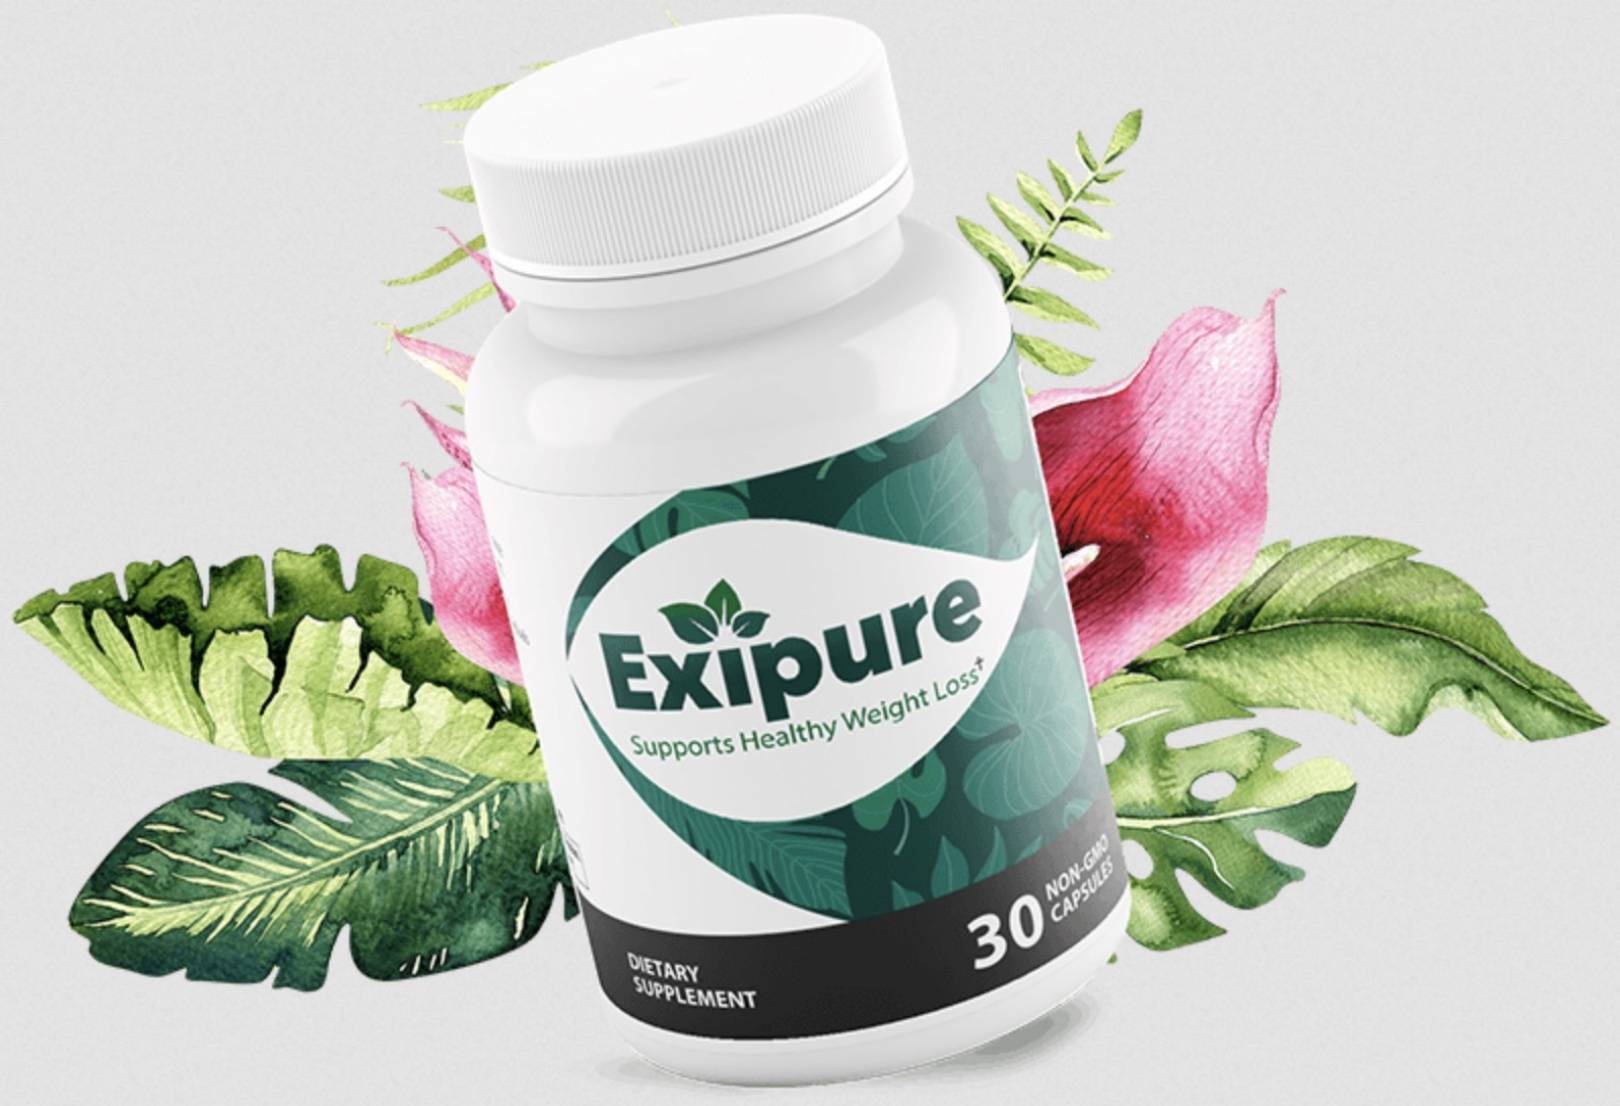 Negative Effects Of Exipure